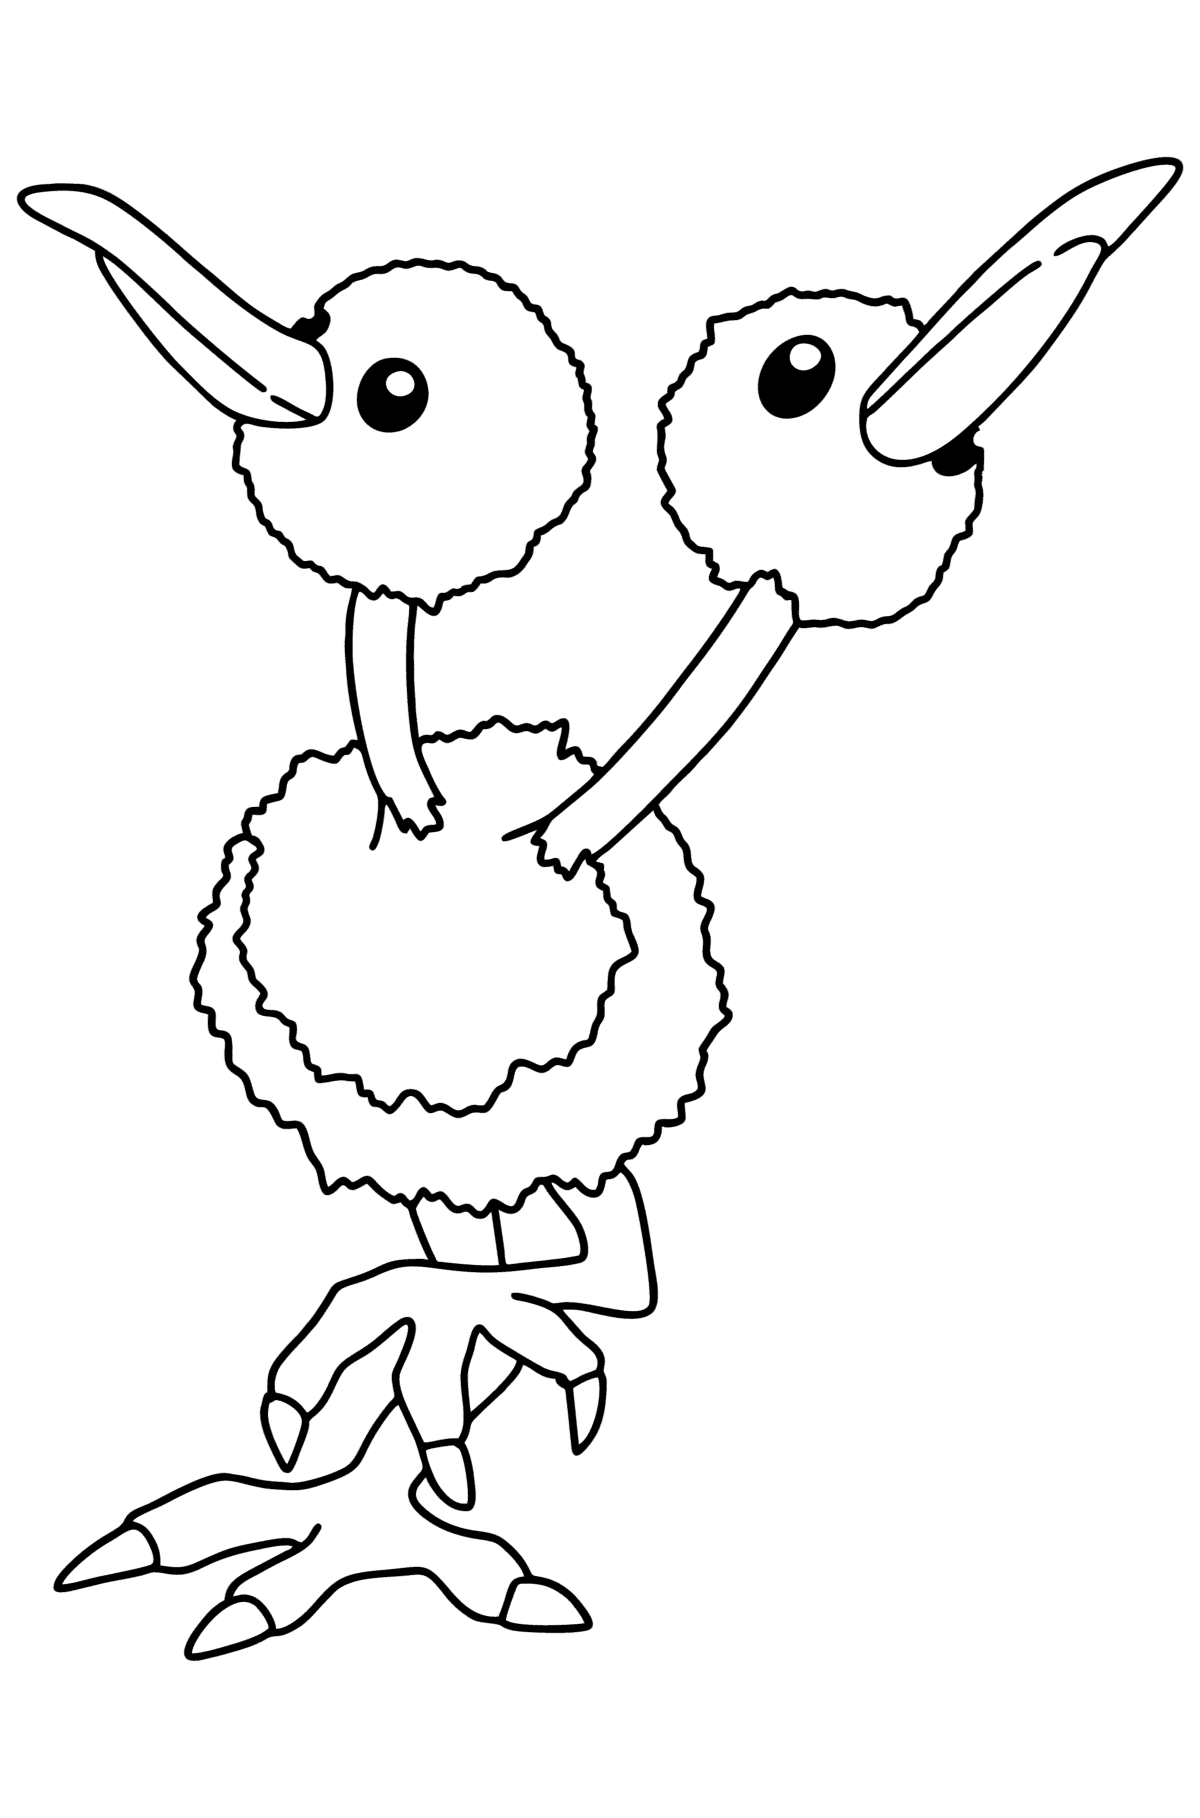 Pokémon Go Doduo coloring page - Coloring Pages for Kids